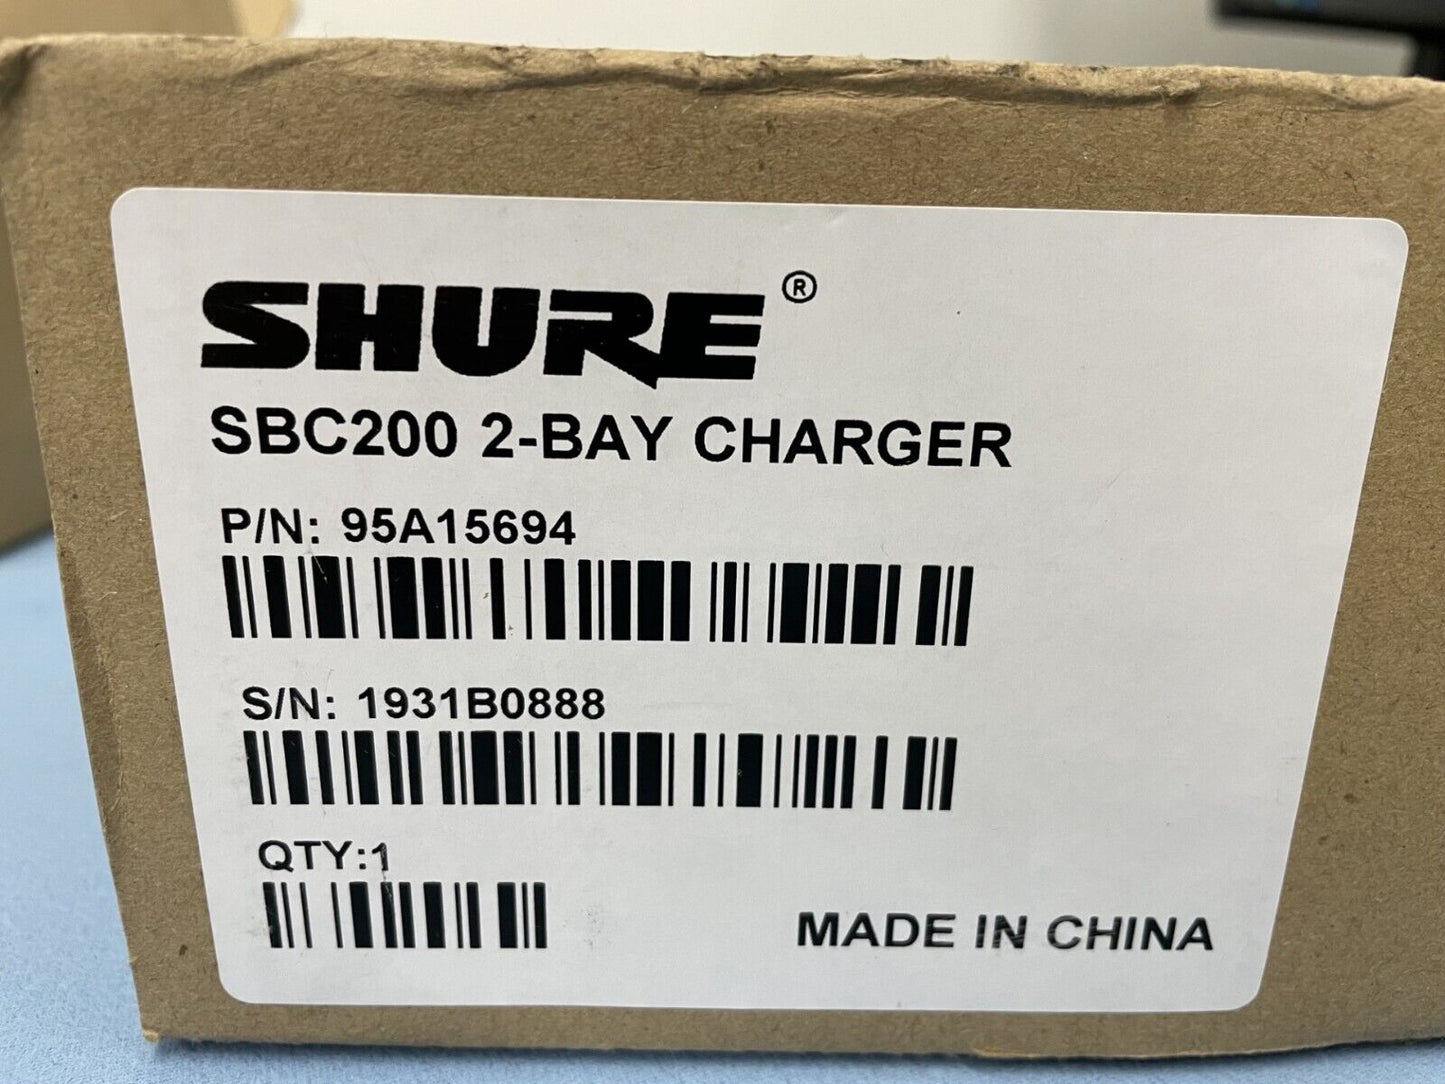 Shure SBC200-US Dual Docking Battery Charger / Microphone Charging Base Station